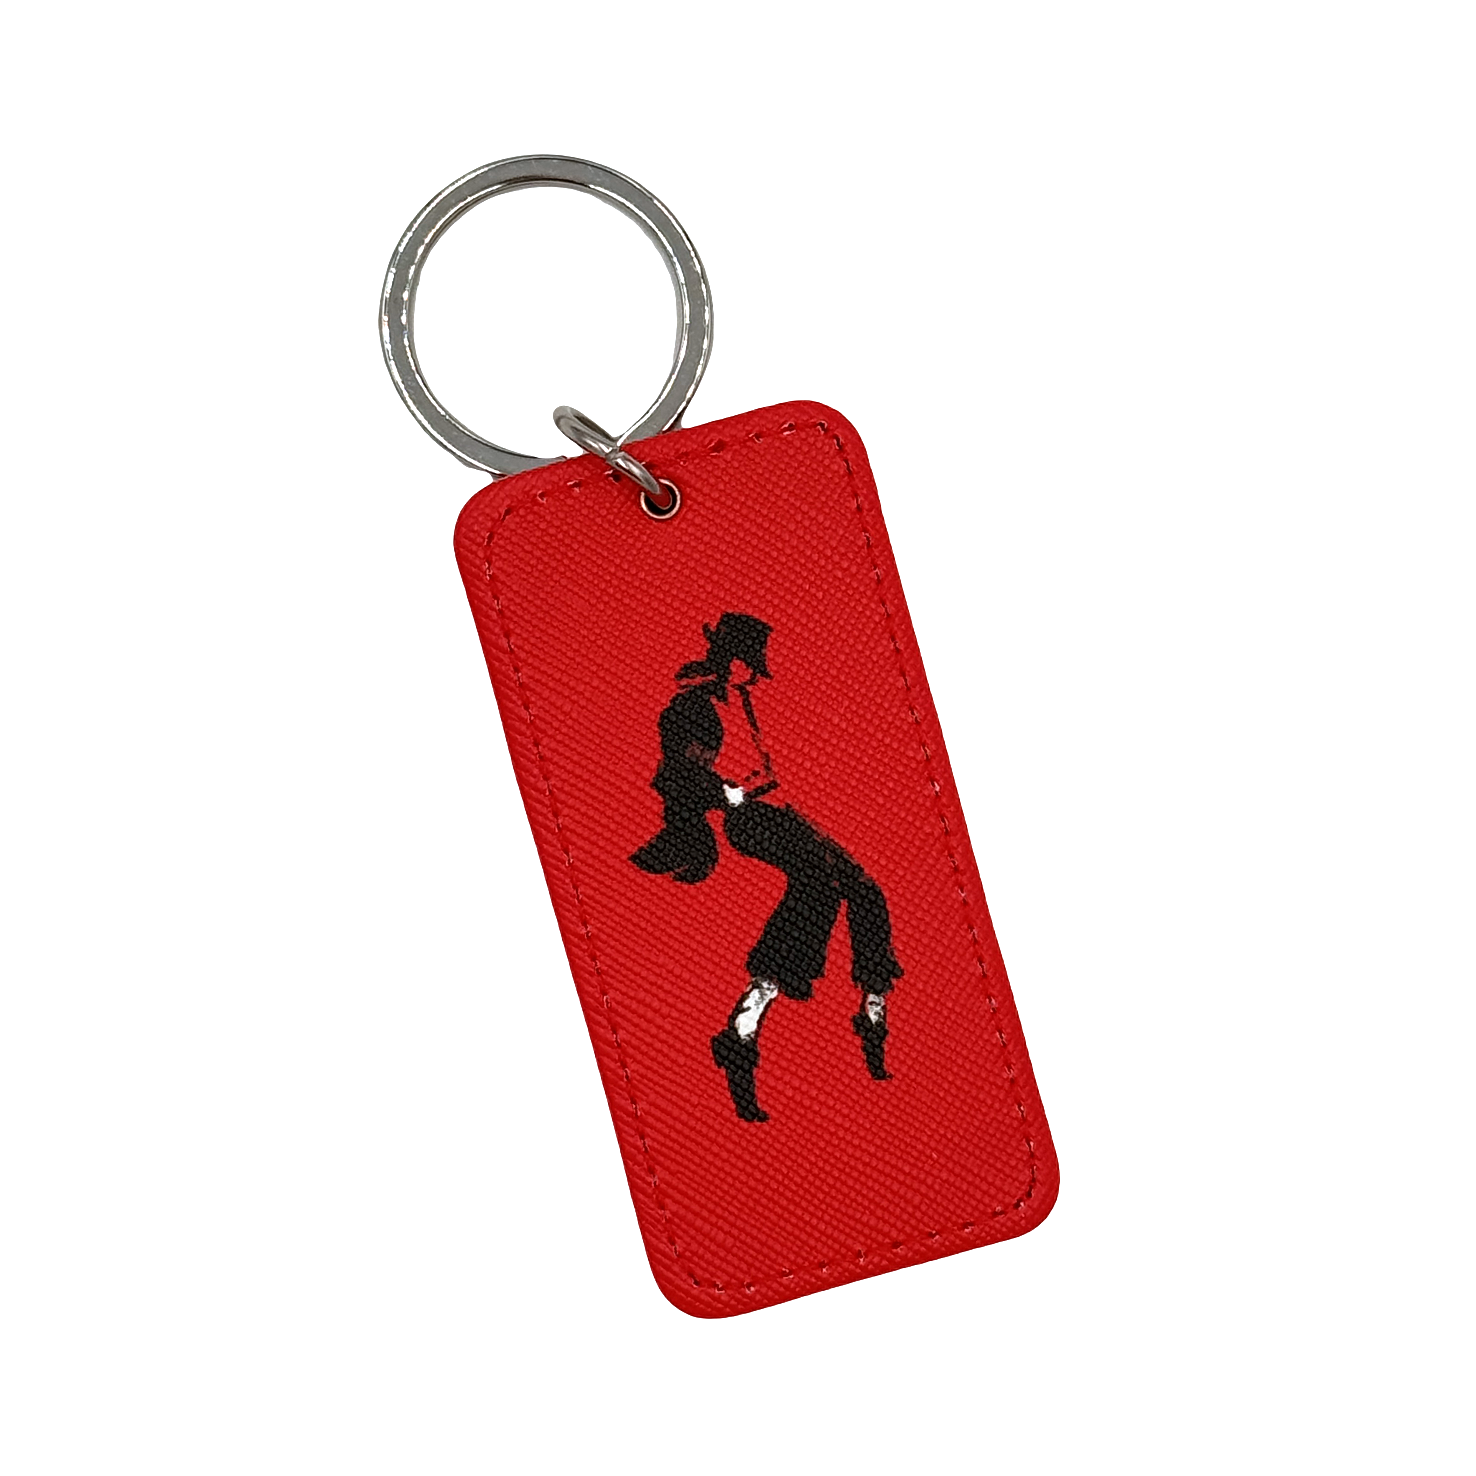 MJ THE MUSICAL Leather Keychain Image